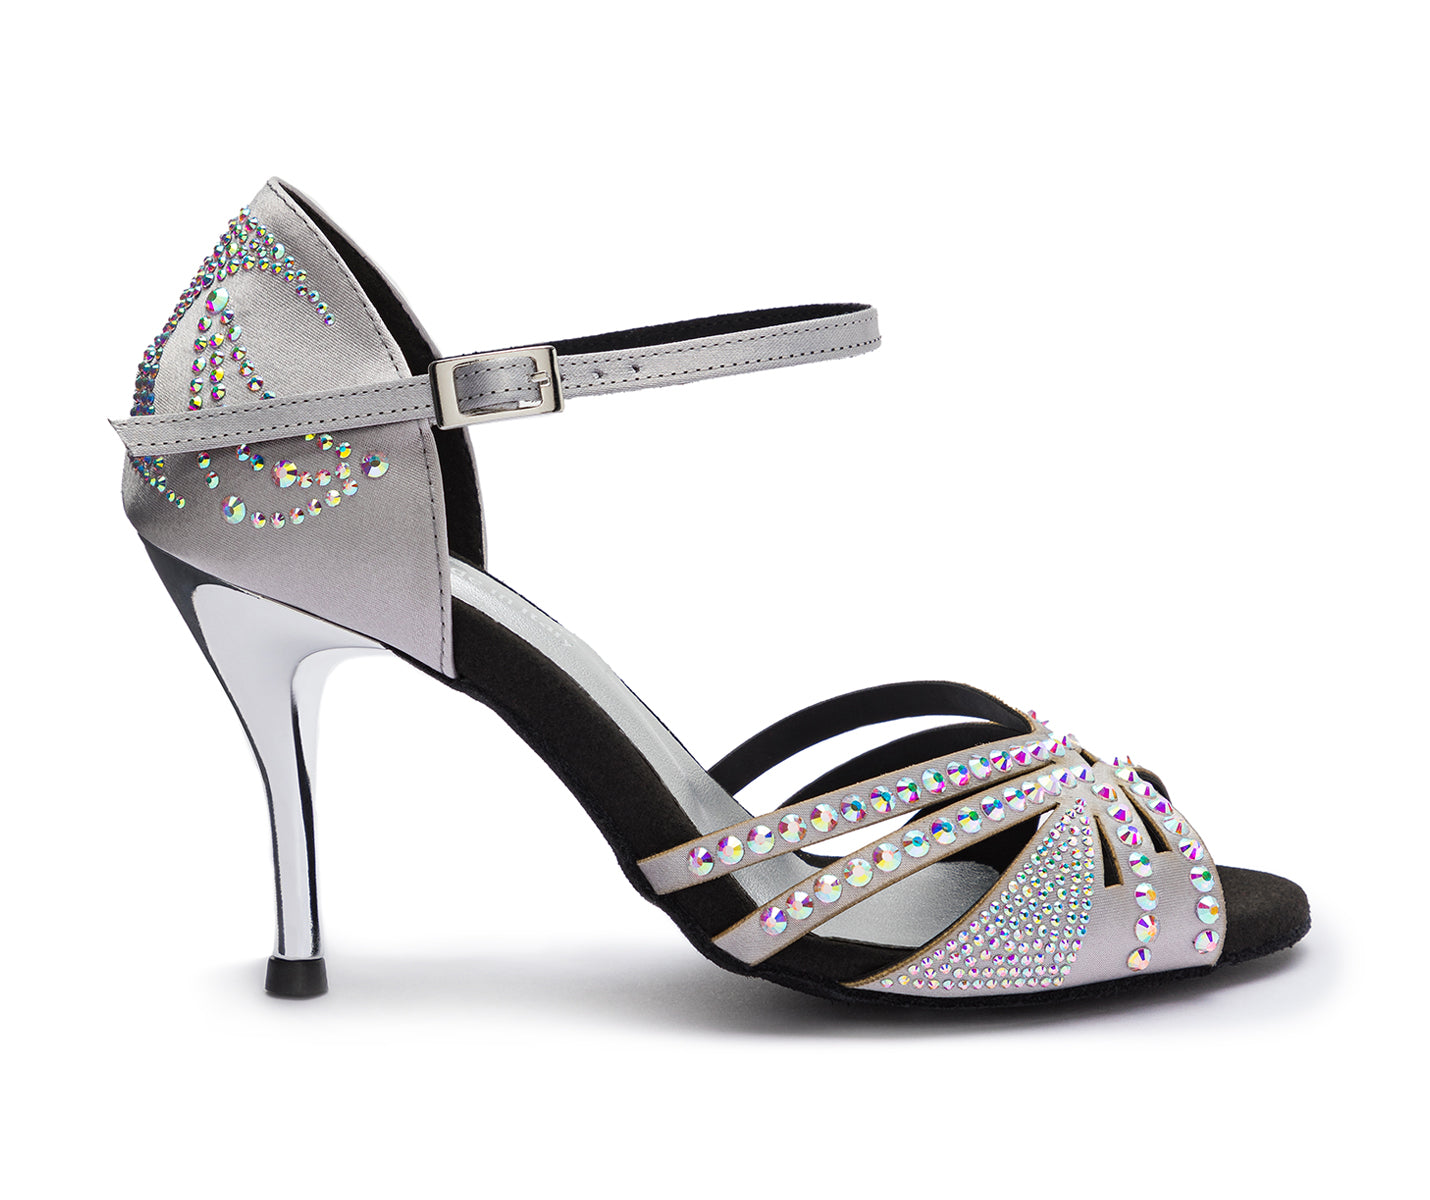 DQ L3m dance shoes in silver with rhinestones